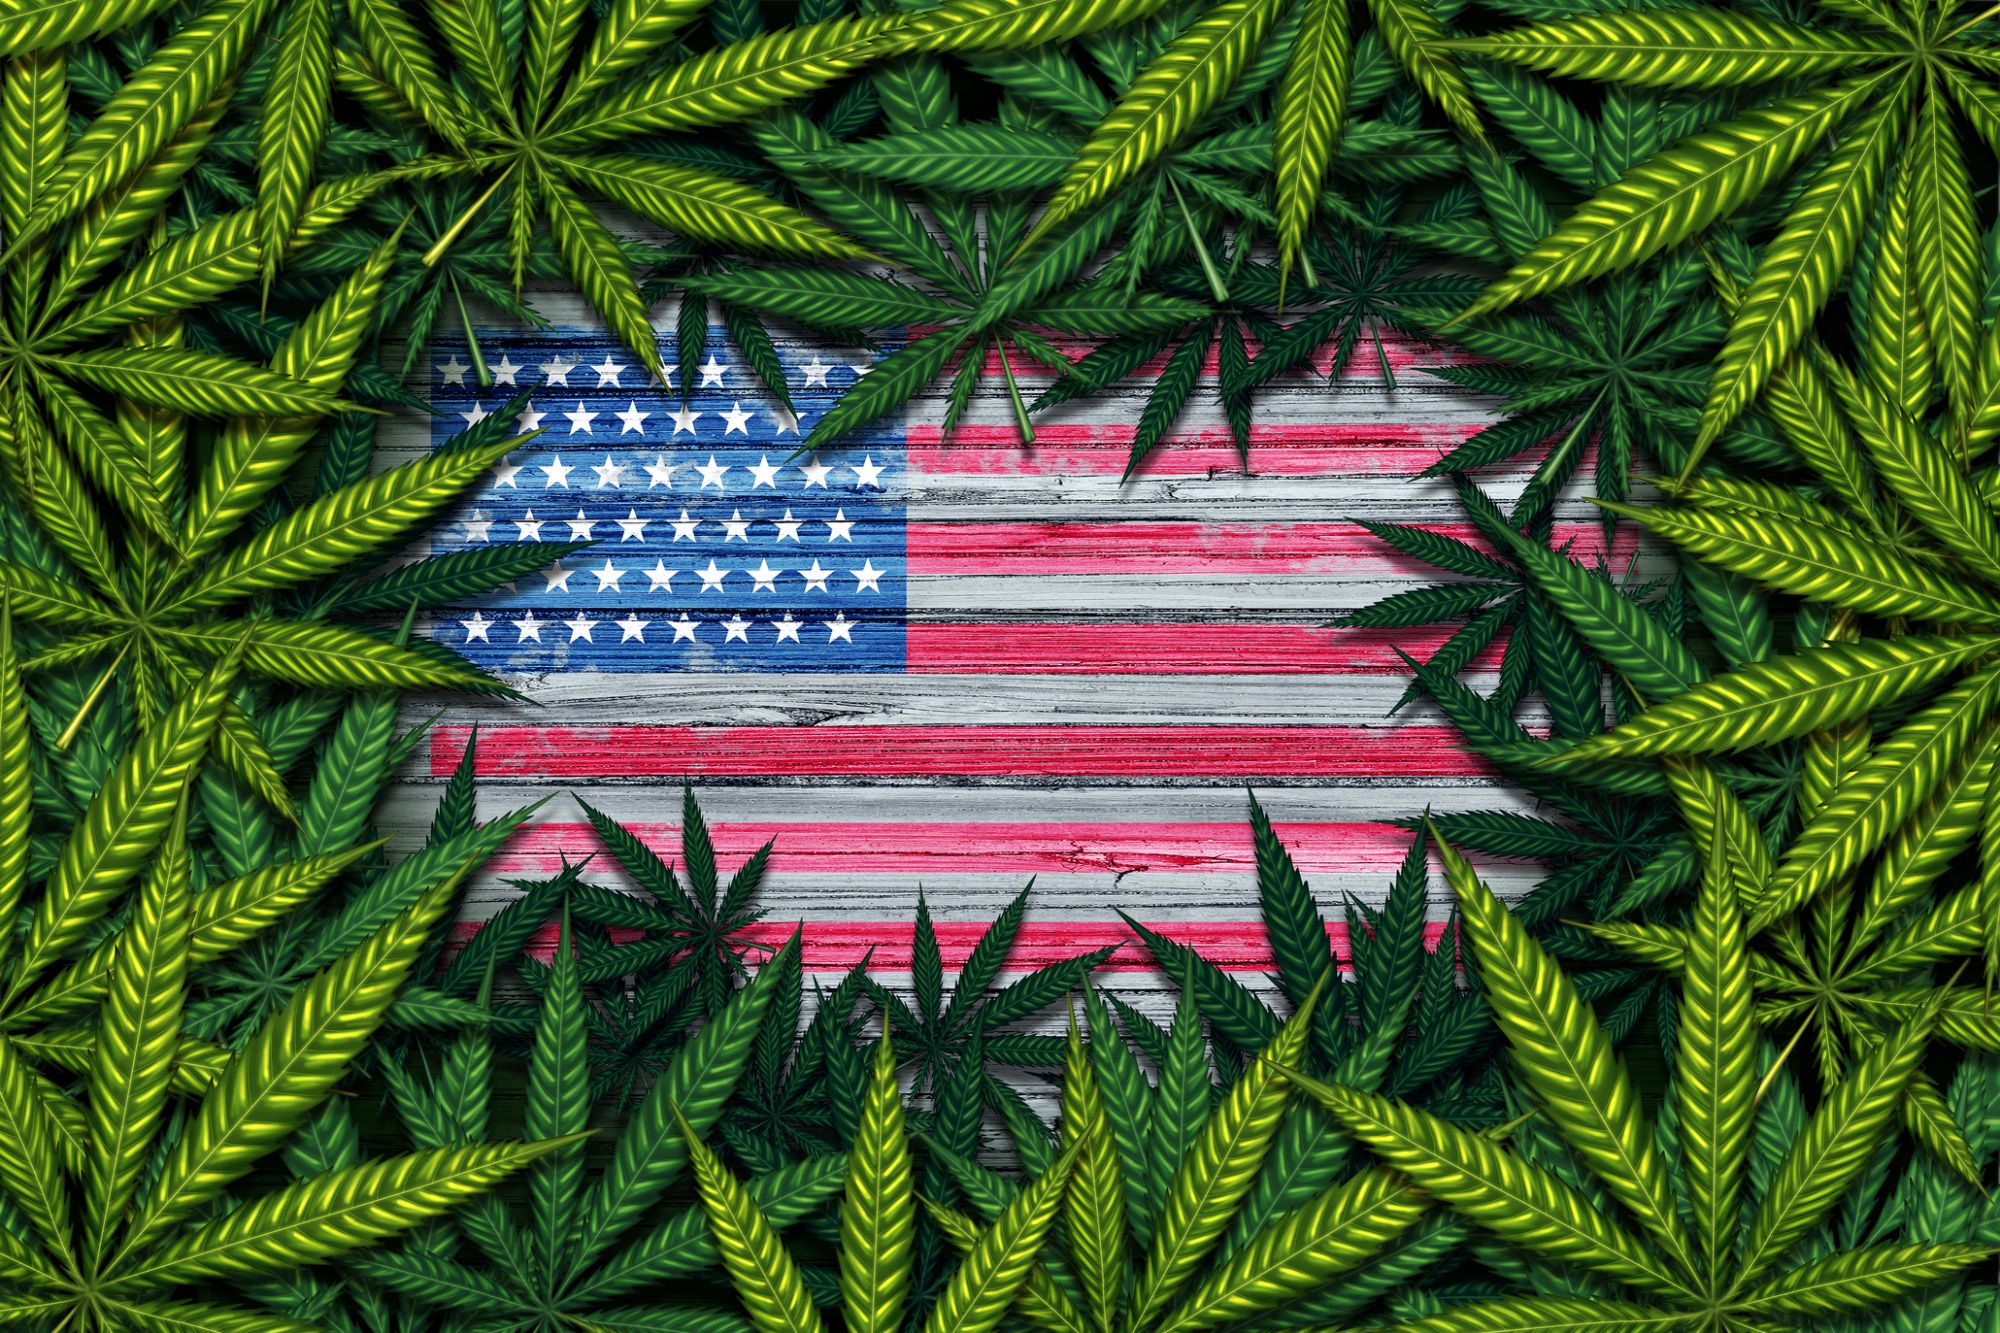 Hemp Legalization Clears House, Off to President for Final Approval